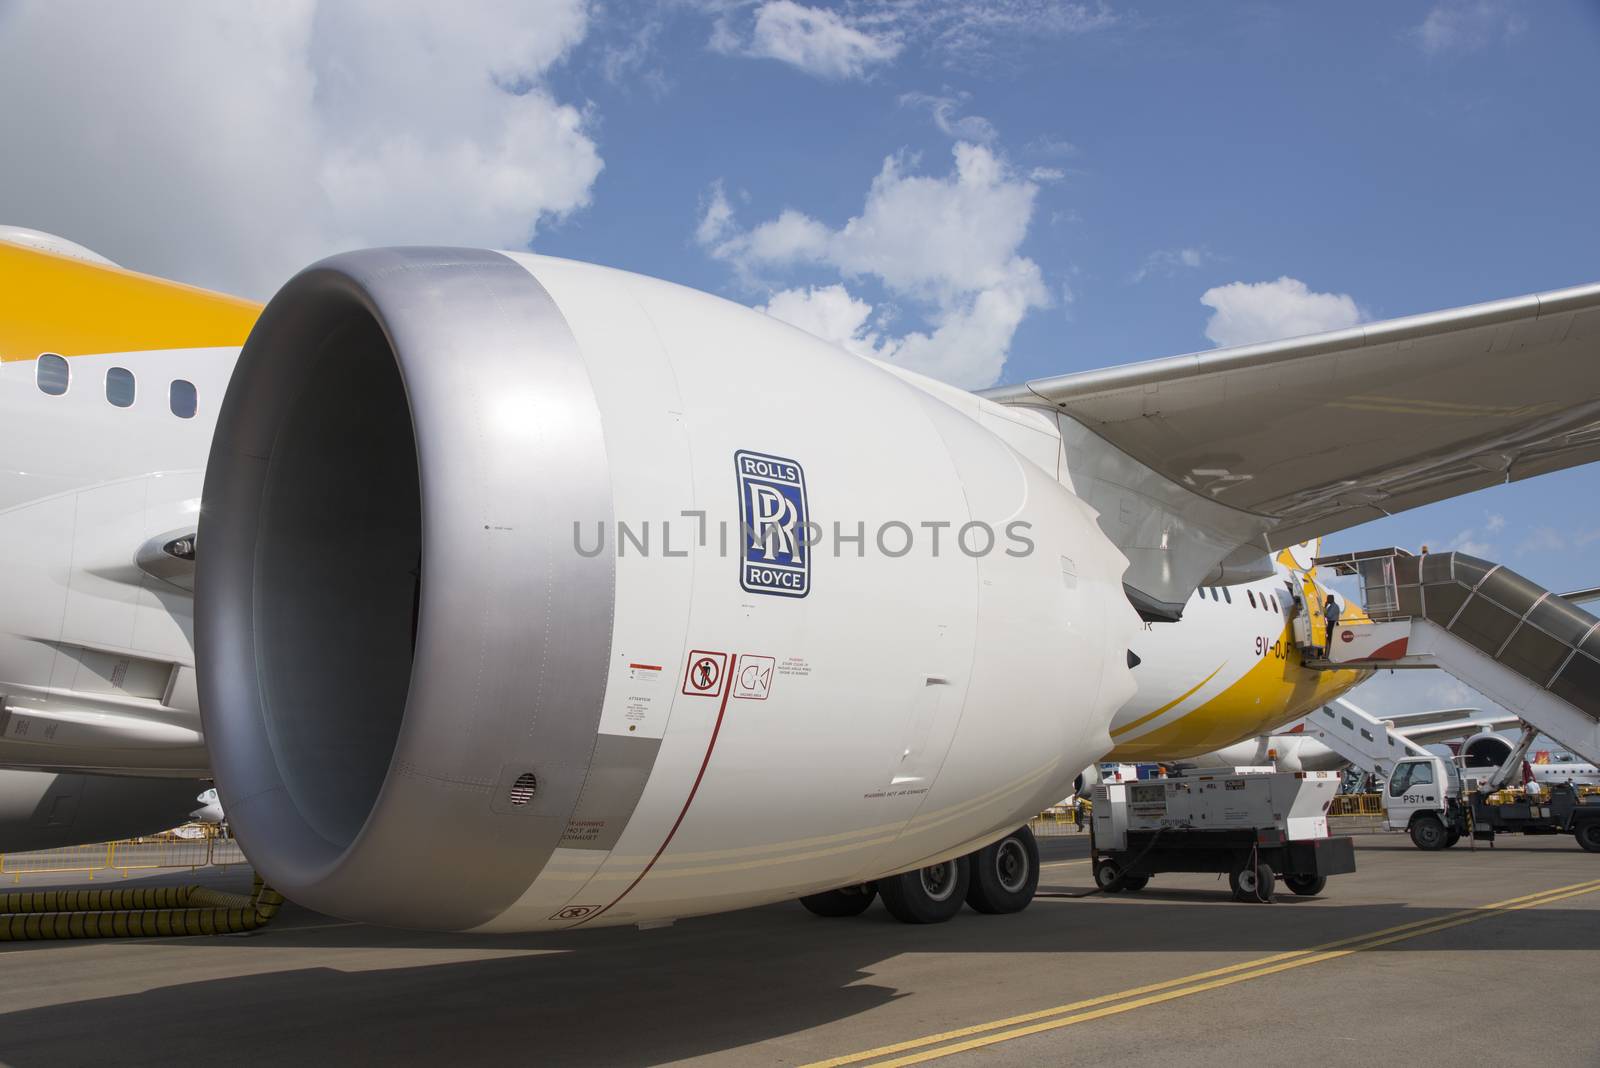 Singapore - February 16, 2016: The Rolls-Royce Trent 1000 engine of a Boeing 787-9 Dreamliner in the livery of no frills Singapore airline Scoot during Singapore Airshow at Changi Exhibition Centre in Singapore.